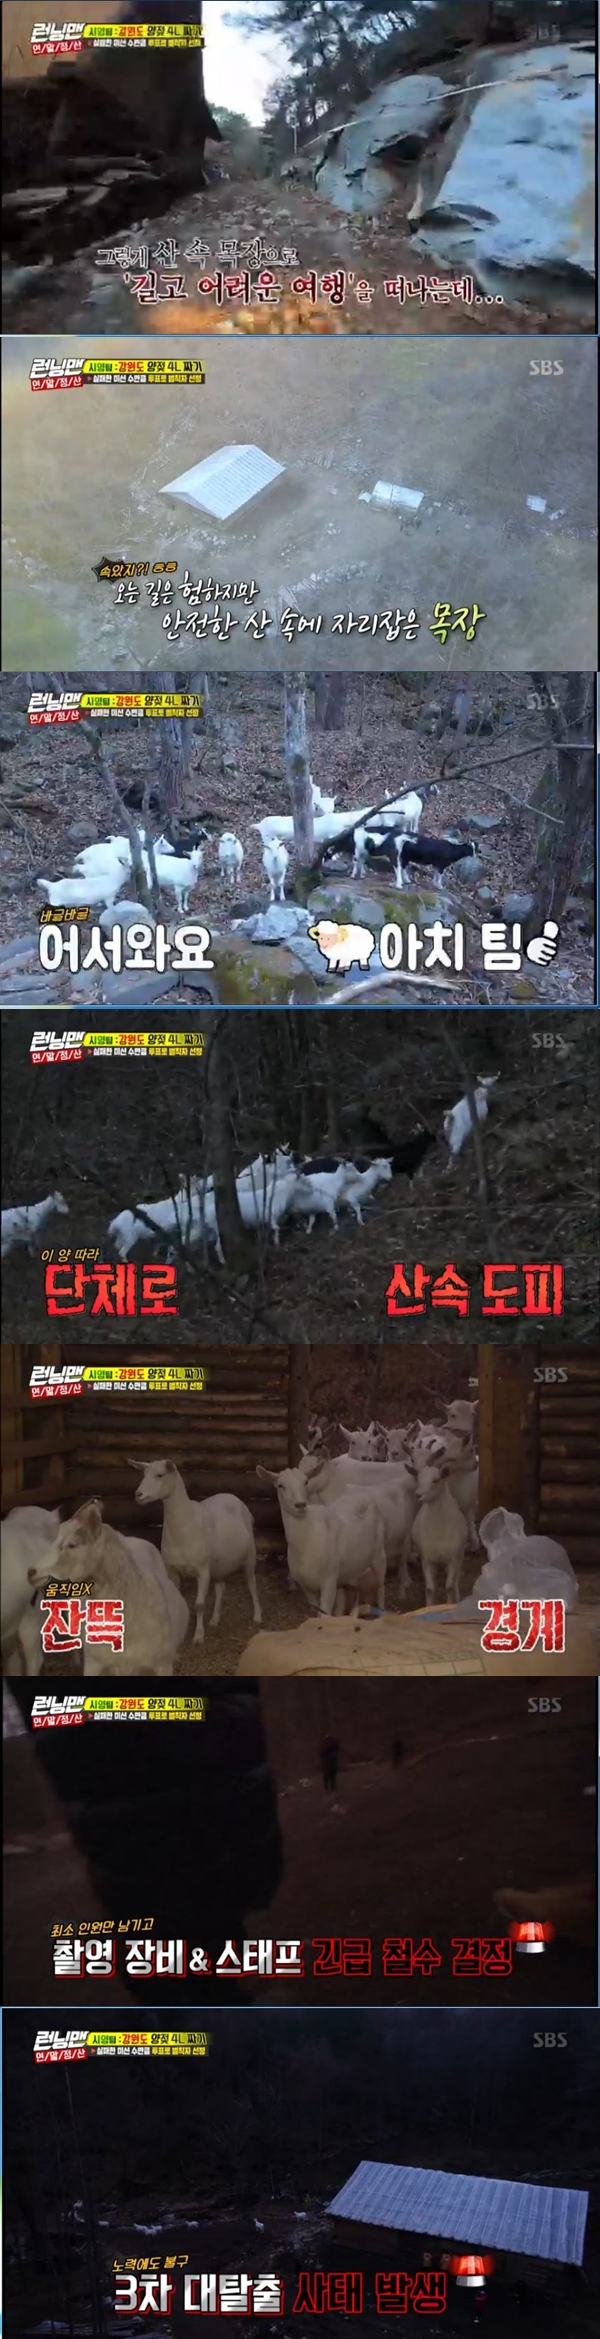 The Yangachi team has been hit by a mission failure Danger.In the SBS entertainment program Running Man broadcasted on the afternoon of the 16th, Lee Kwang-soo, Haha, and Lee Si-young performed a mission to squeeze 4L of sheeps milk at Gangwon-do ranch.The Yangachi team, who found the king-related ranch at once, showed a start to a good start, but they soon hit Danger.The three people entered the forest and tried to get close to each other in their first meeting with the sheep, but the sheep did not come in fear.The rancher belled the sheep home, but when he saw a lot of staff in the ranch, he ran away into the forest in fear.In the ongoing escape of the sheep, the rancher took special measures, saying, Lets turn off the lighting and try to get along with it.Lee Si-young was worried that we are going to be later than the Hong Kong team.The three men watched the rancher sing the sheep, worried, and managed to get them into the house on their last attempt.On the other hand, this weeks broadcast was followed by Running Man members and Lee Si-young, who re-enacted the failed mission this year, Year-end Settlement Race.